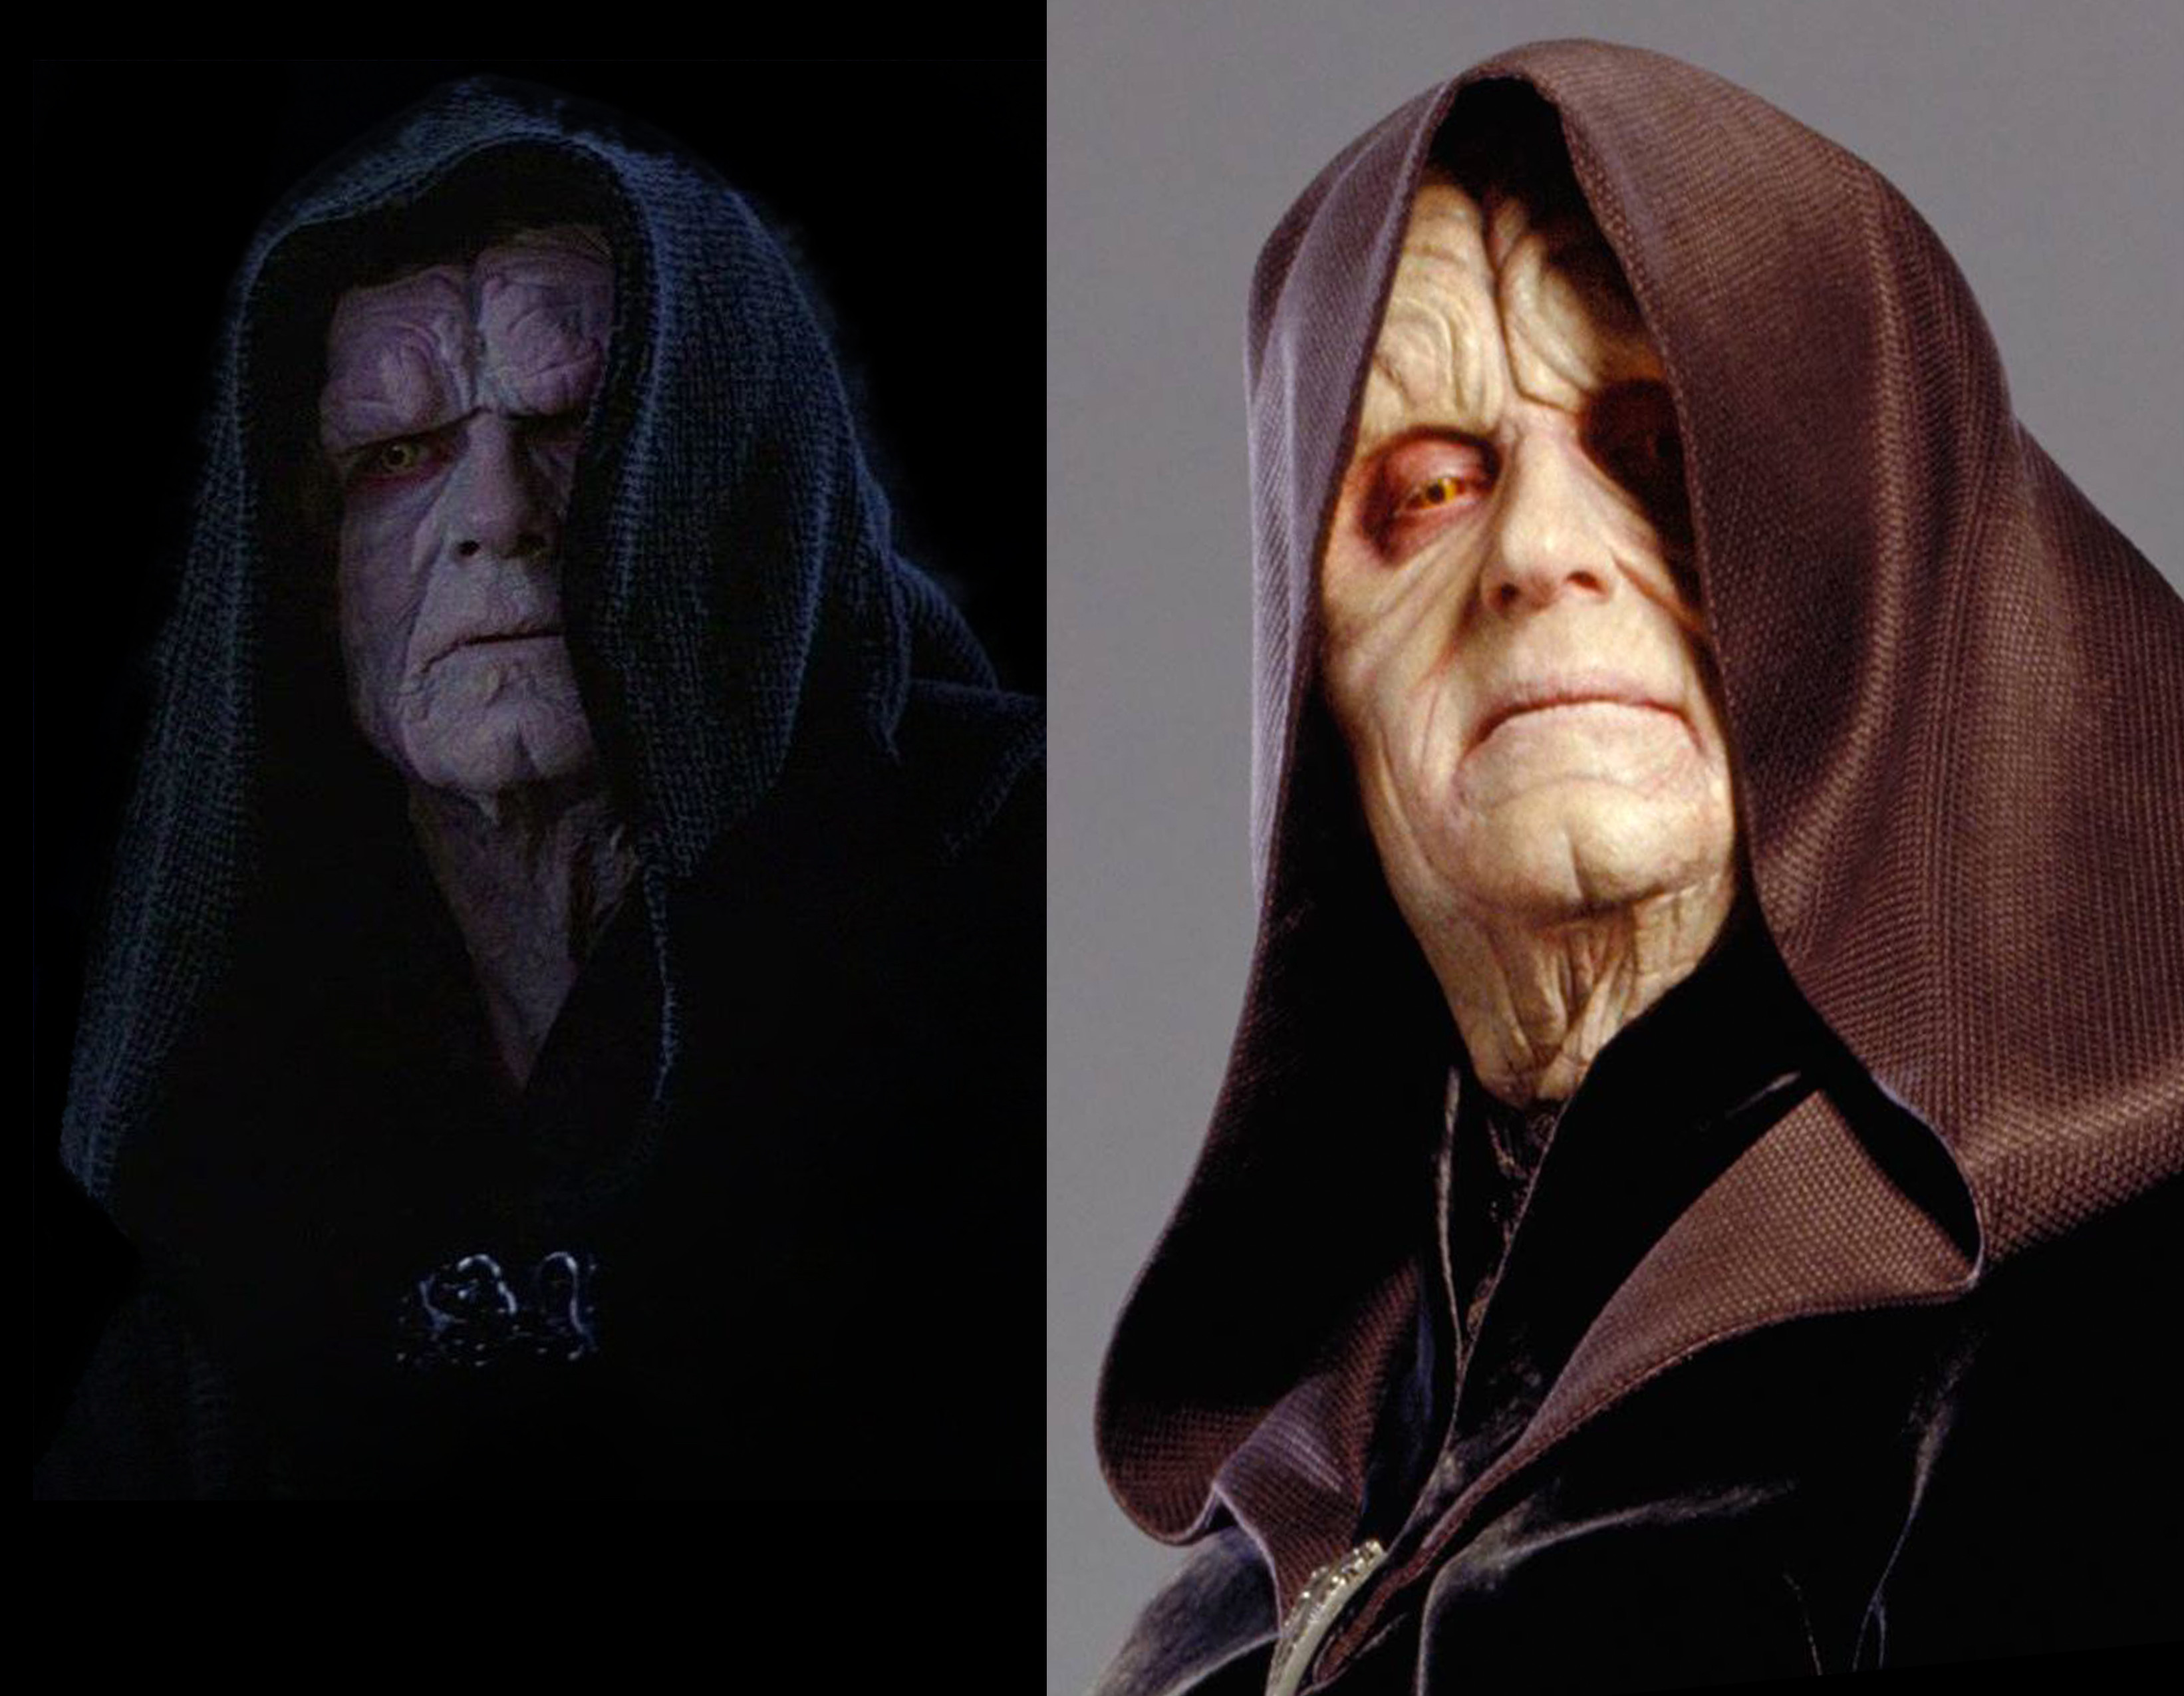 SWtheory wanted a mix of old Emperor and episode 3 emperor for the poster. 